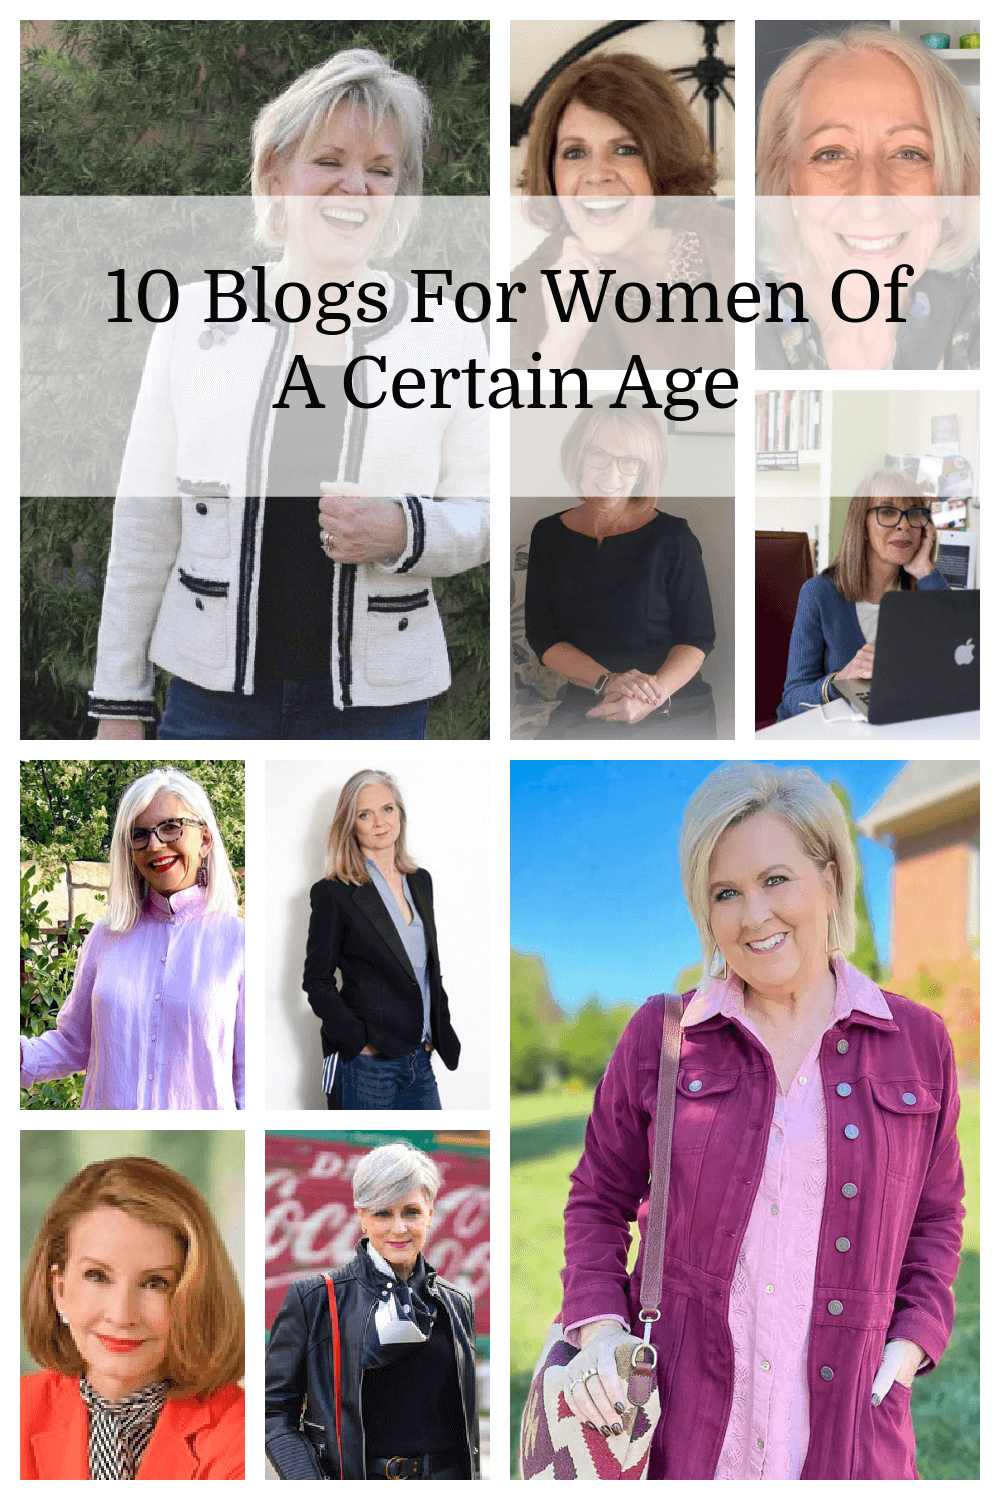 In 10 Blogs For Women Of A Certain Age, I wandered the internet looking for blogs written by older women that I thought might interest you.